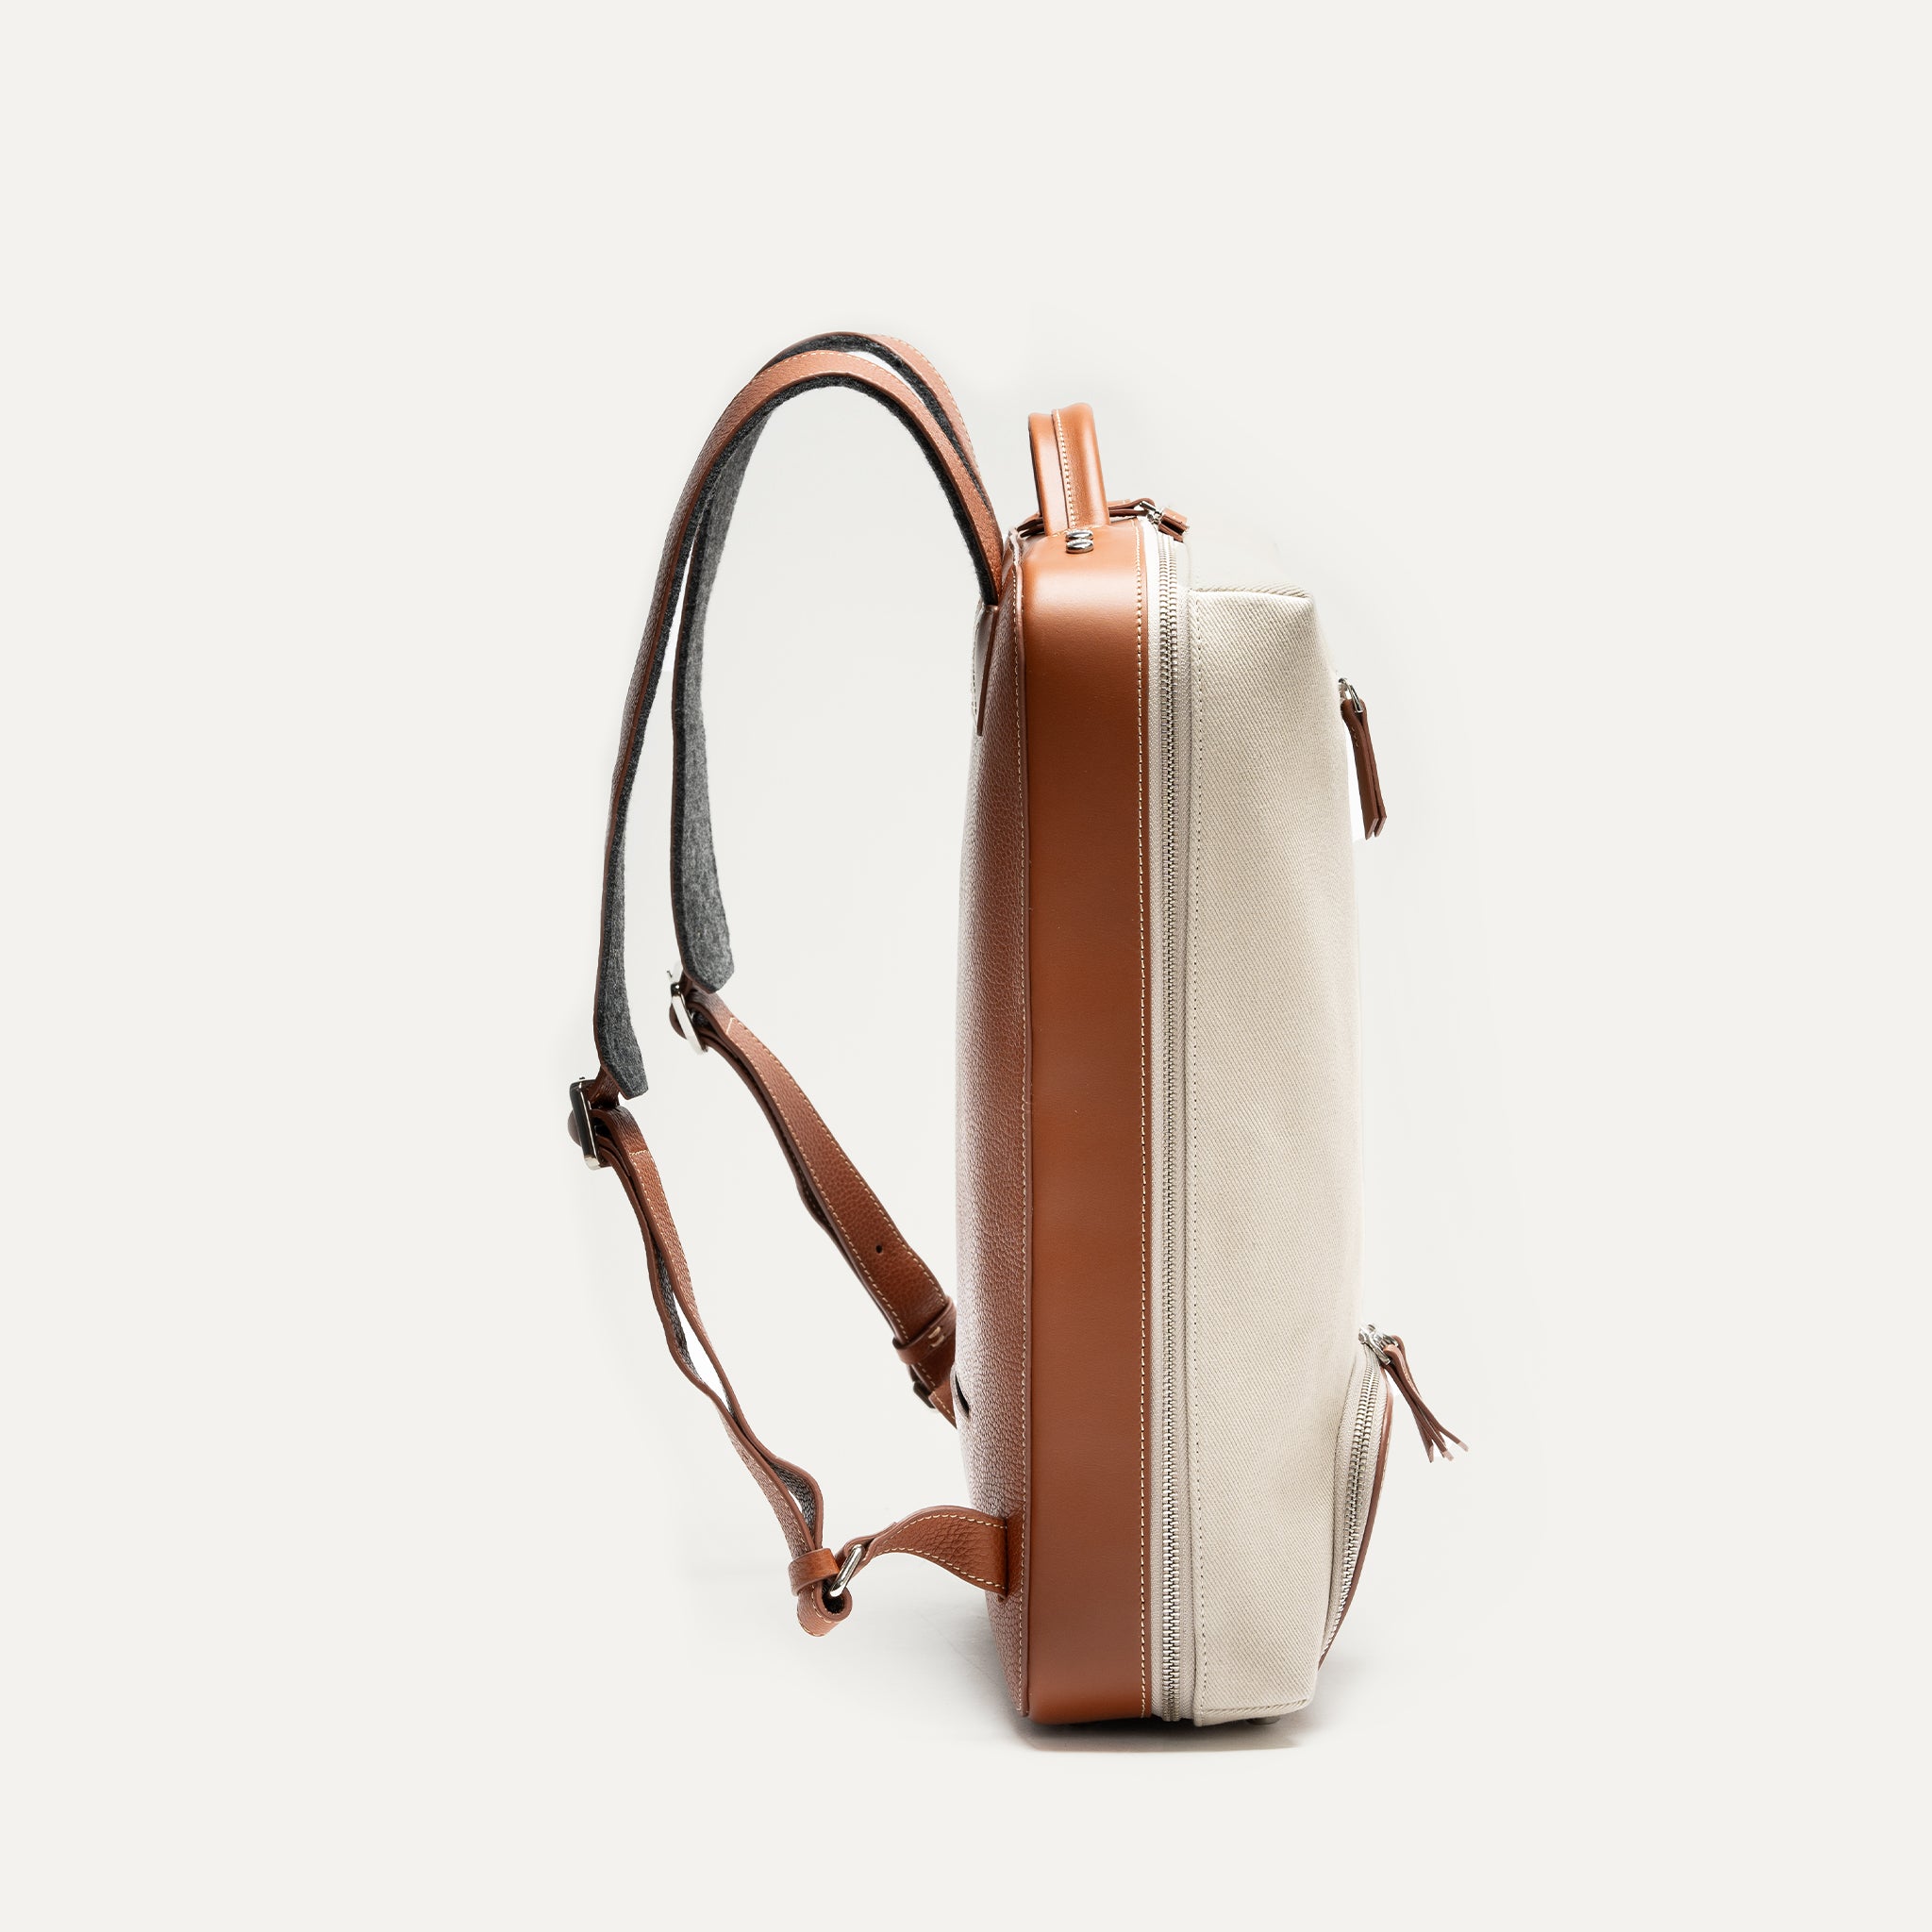 RUBENS, Sand | lundi Cotton and Leather One Day Backpack